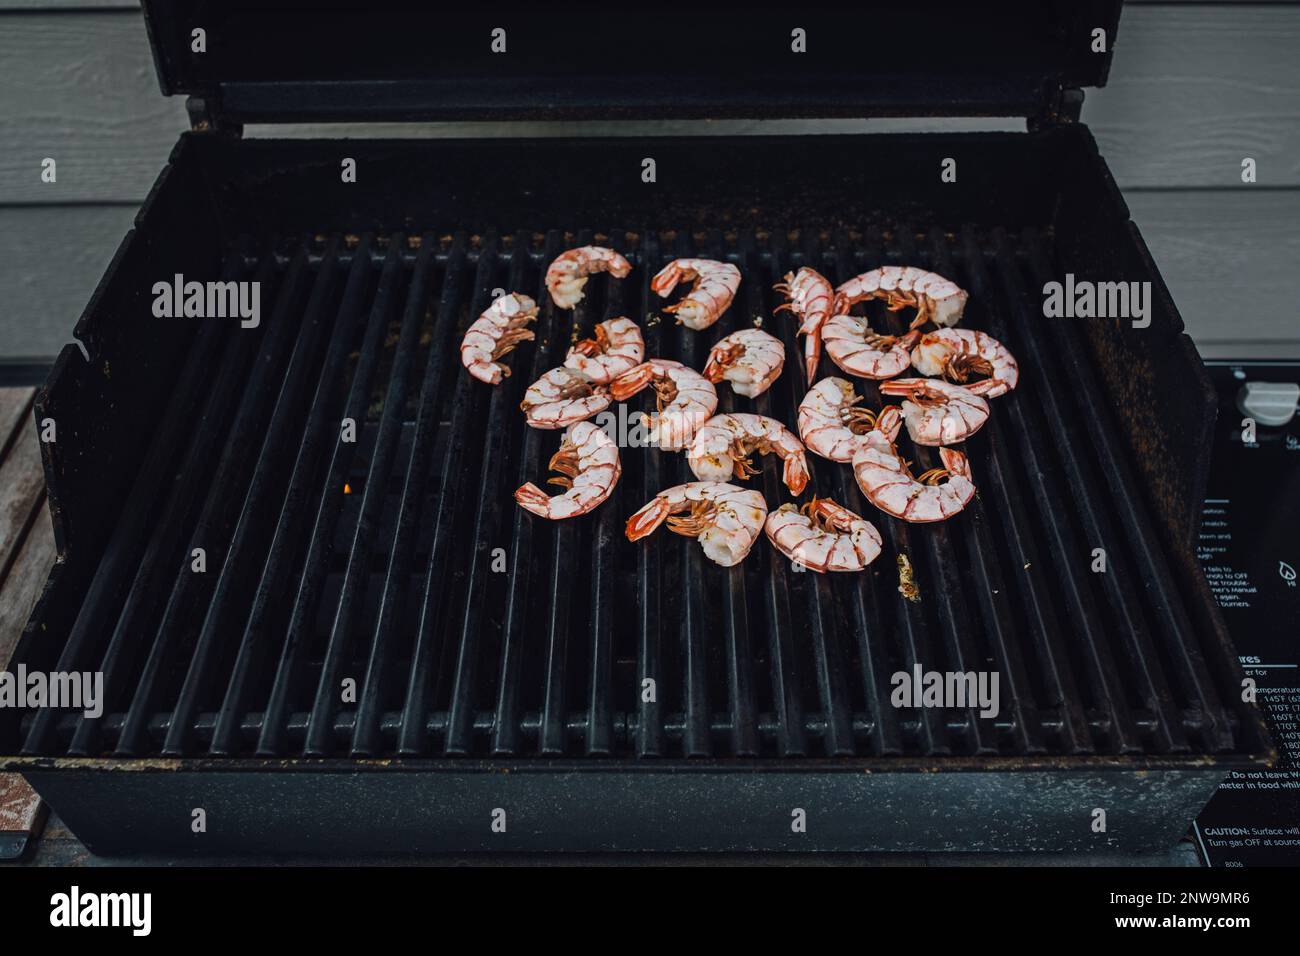 loose Patagonian prawns with shell on the barbecue, shrimp on the barbie Stock Photo